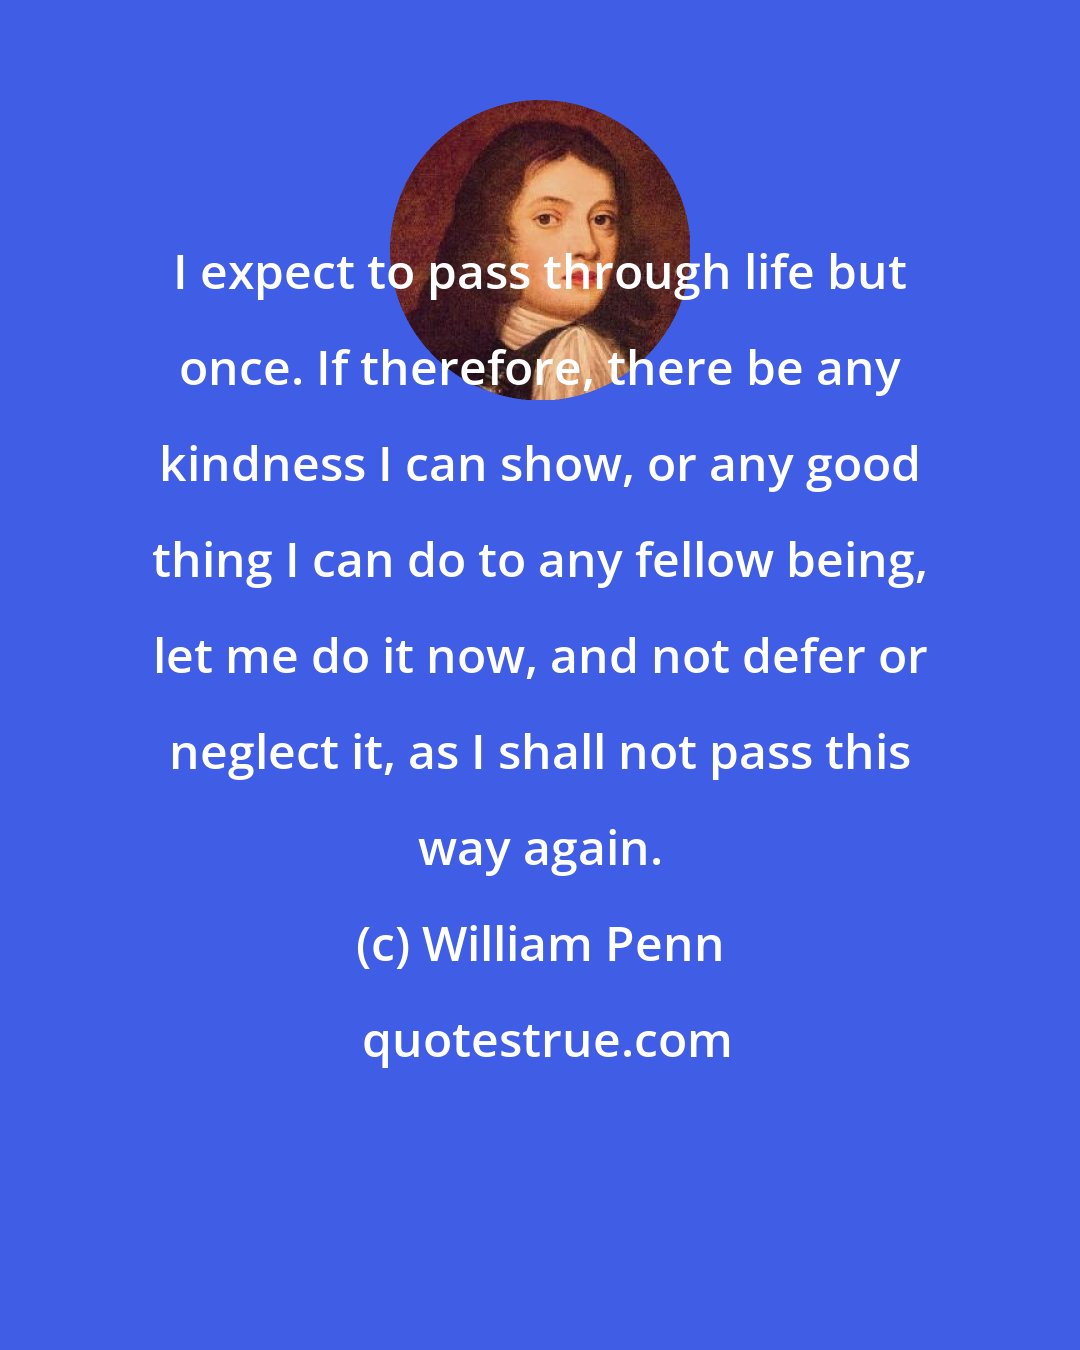 William Penn: I expect to pass through life but once. If therefore, there be any kindness I can show, or any good thing I can do to any fellow being, let me do it now, and not defer or neglect it, as I shall not pass this way again.